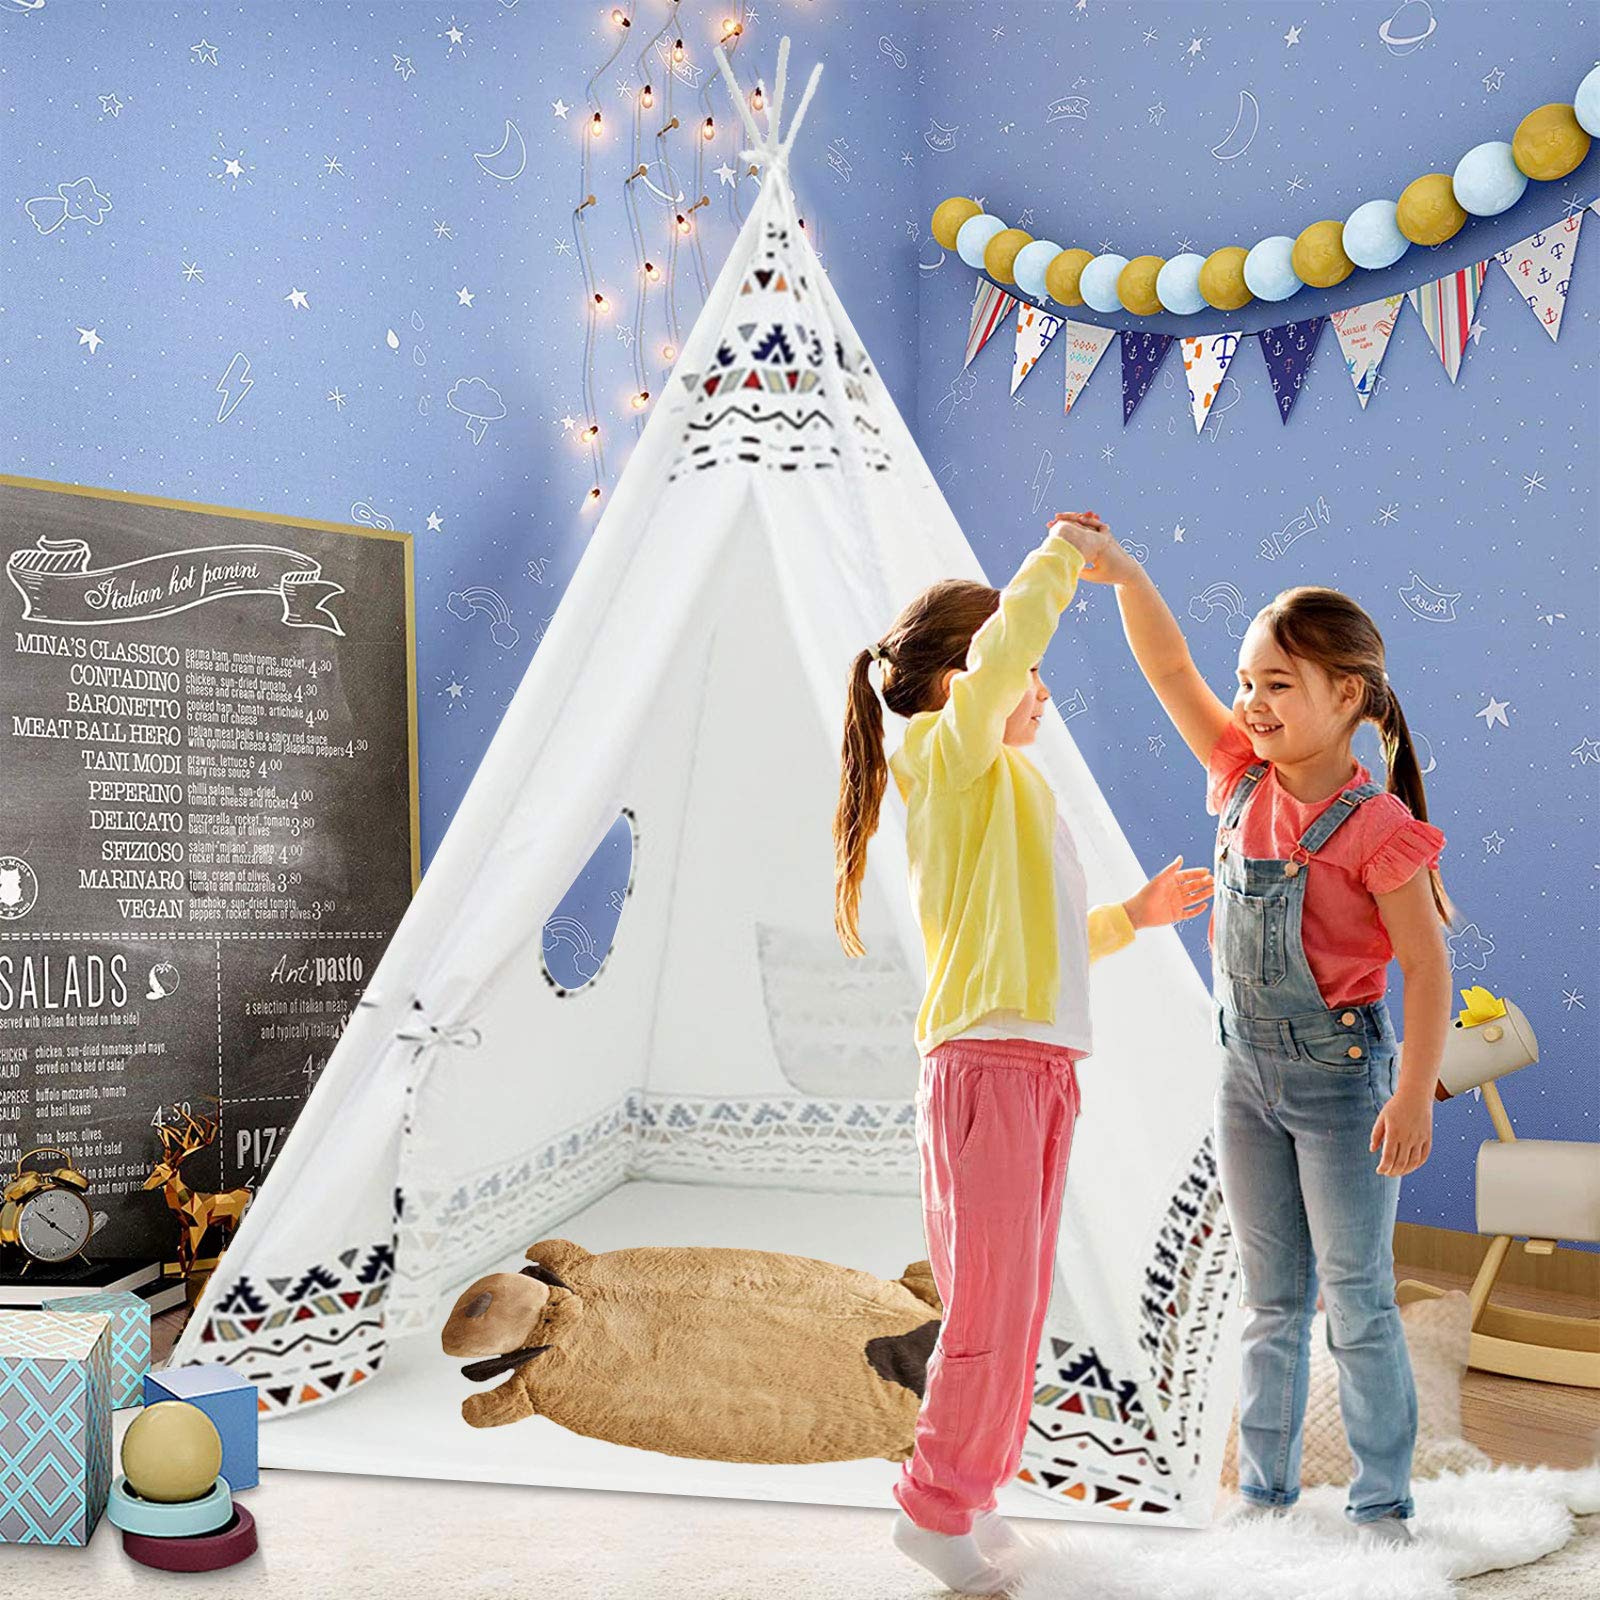 2021 China New Design Basketball Hoop - Arkmiido Teepee Tent for Kids Raw White Canvas Teepee with Windows Carry Case Foldable Children Play Tents Playhouse Toys for Baby Toddler Girls/Boys Indoor...